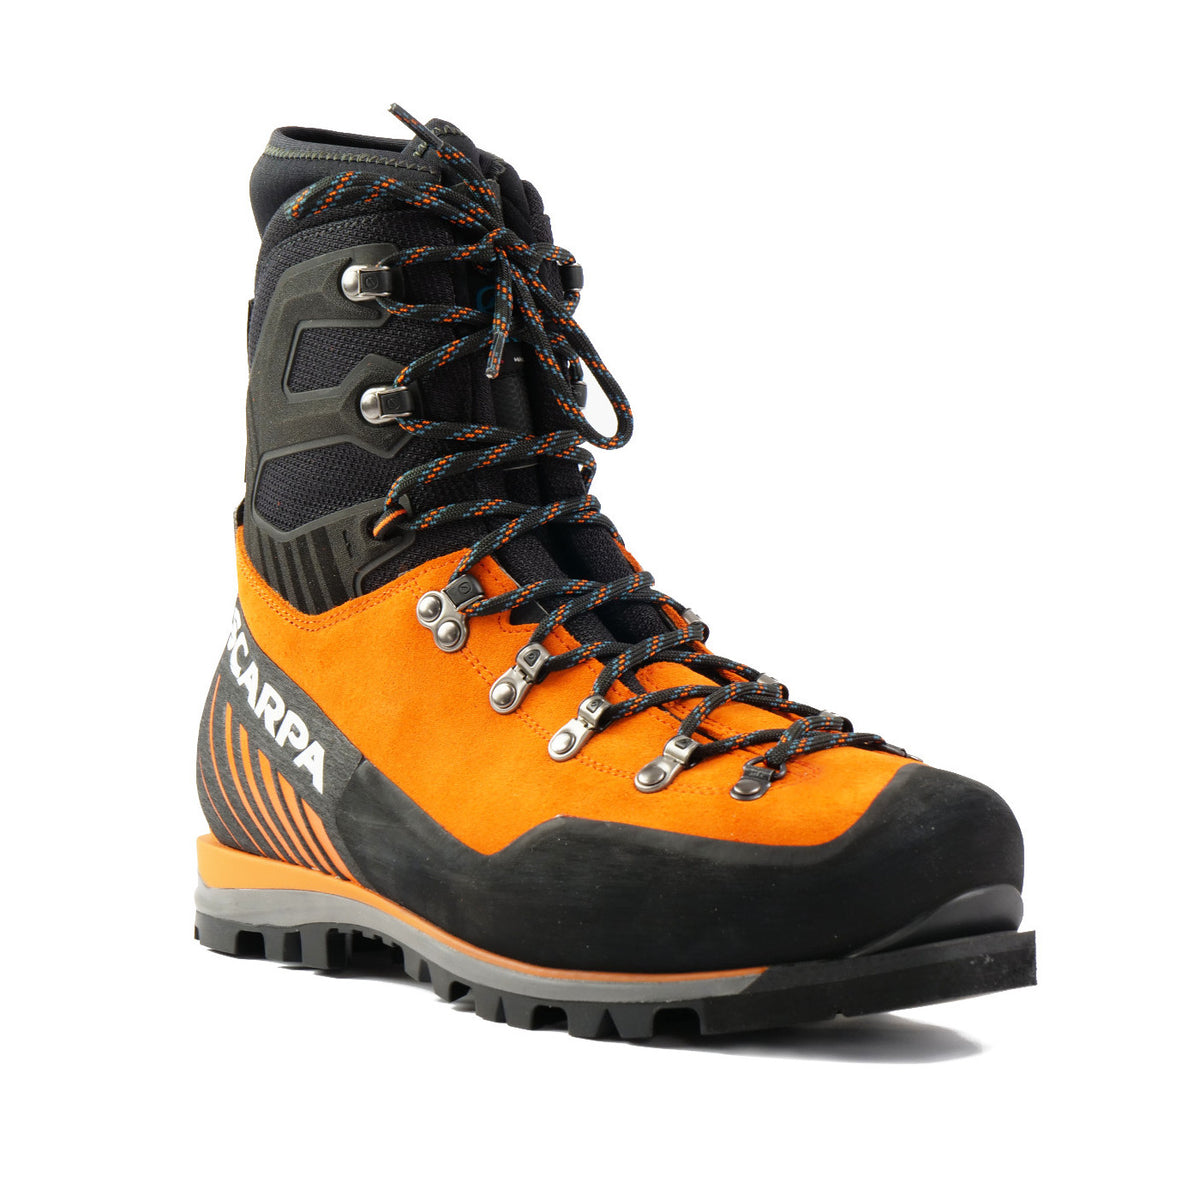 Front view Scarpa Mont Blanc Pro GTX with orange Perwanger outer and black rubber and flexible sock and tongue